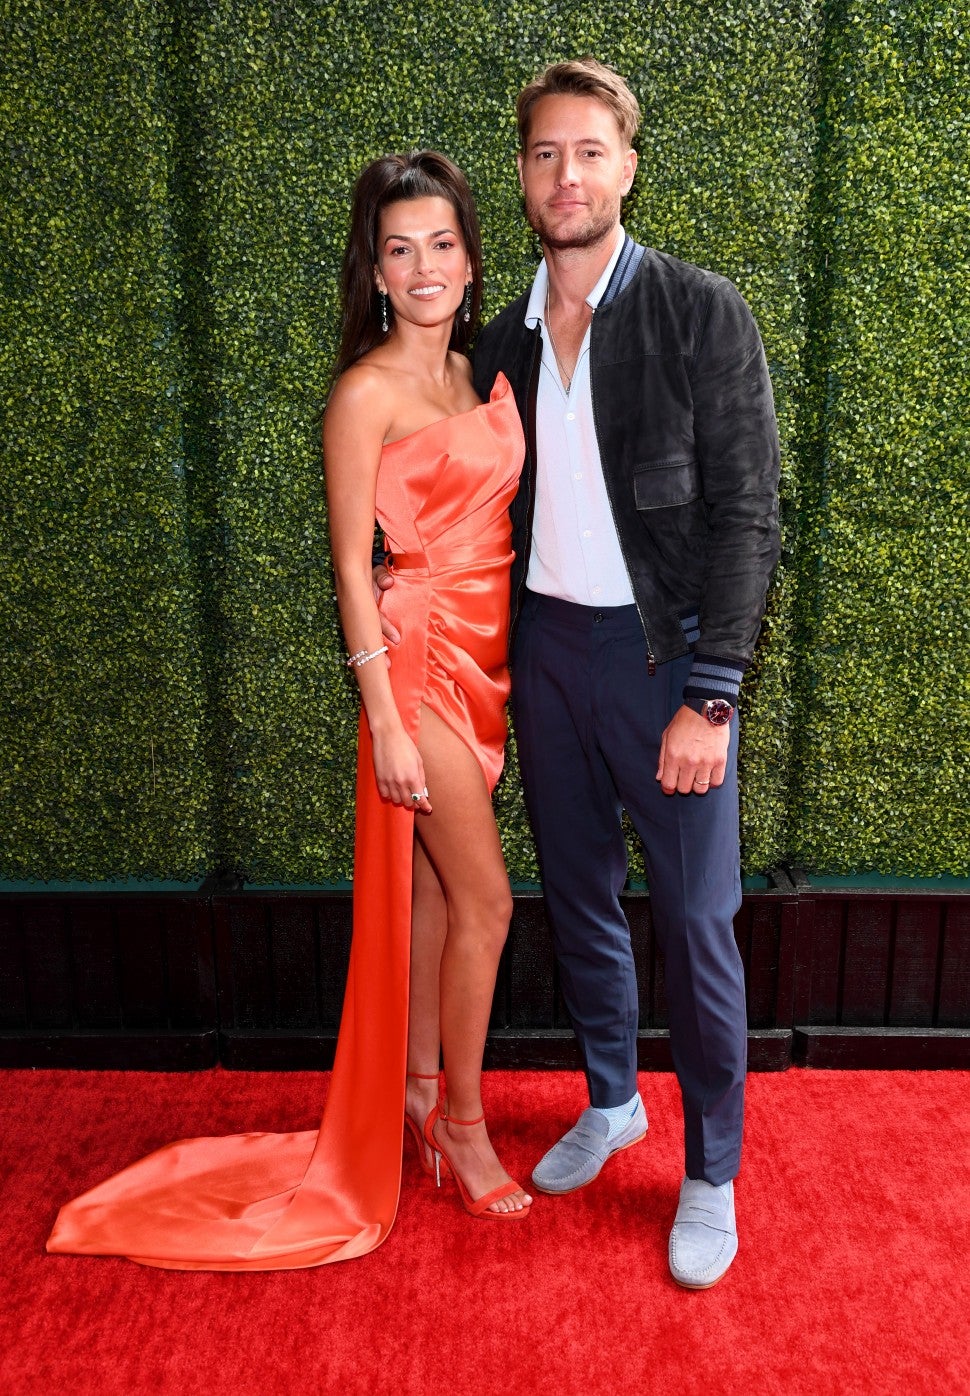 Sofia Pernas and Justin Hartley attend the 2021 MTV Movie & TV Awards at the Hollywood Palladium on May 16, 2021 in Los Angeles, California.